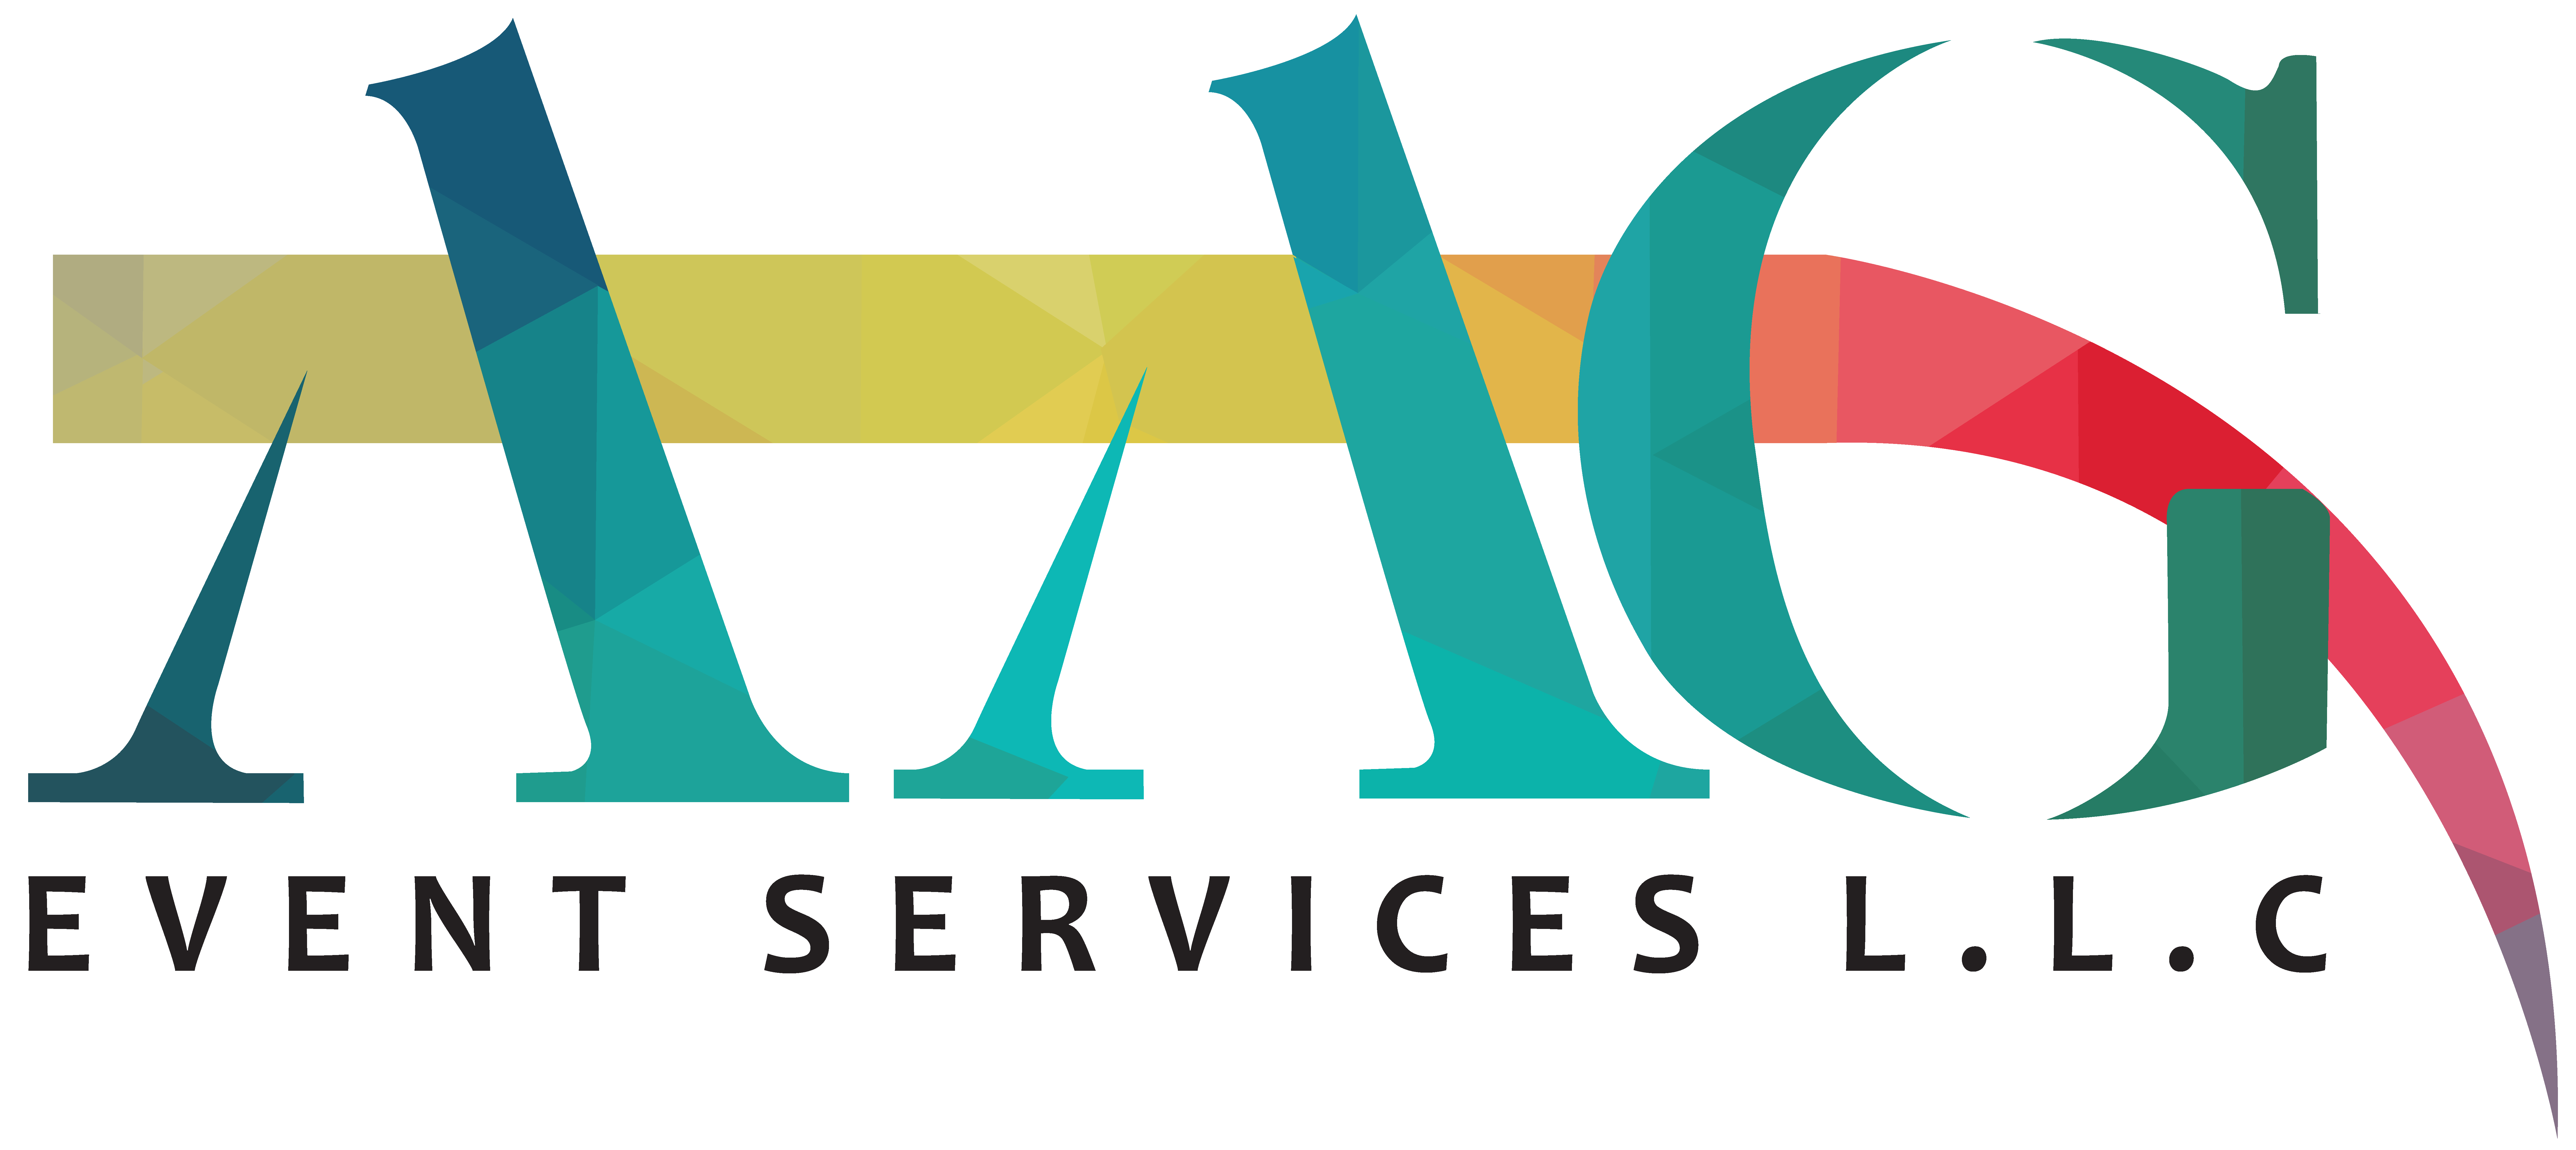 Aag Logo - AAG Event Services - Company employment profile | Laimoon.com